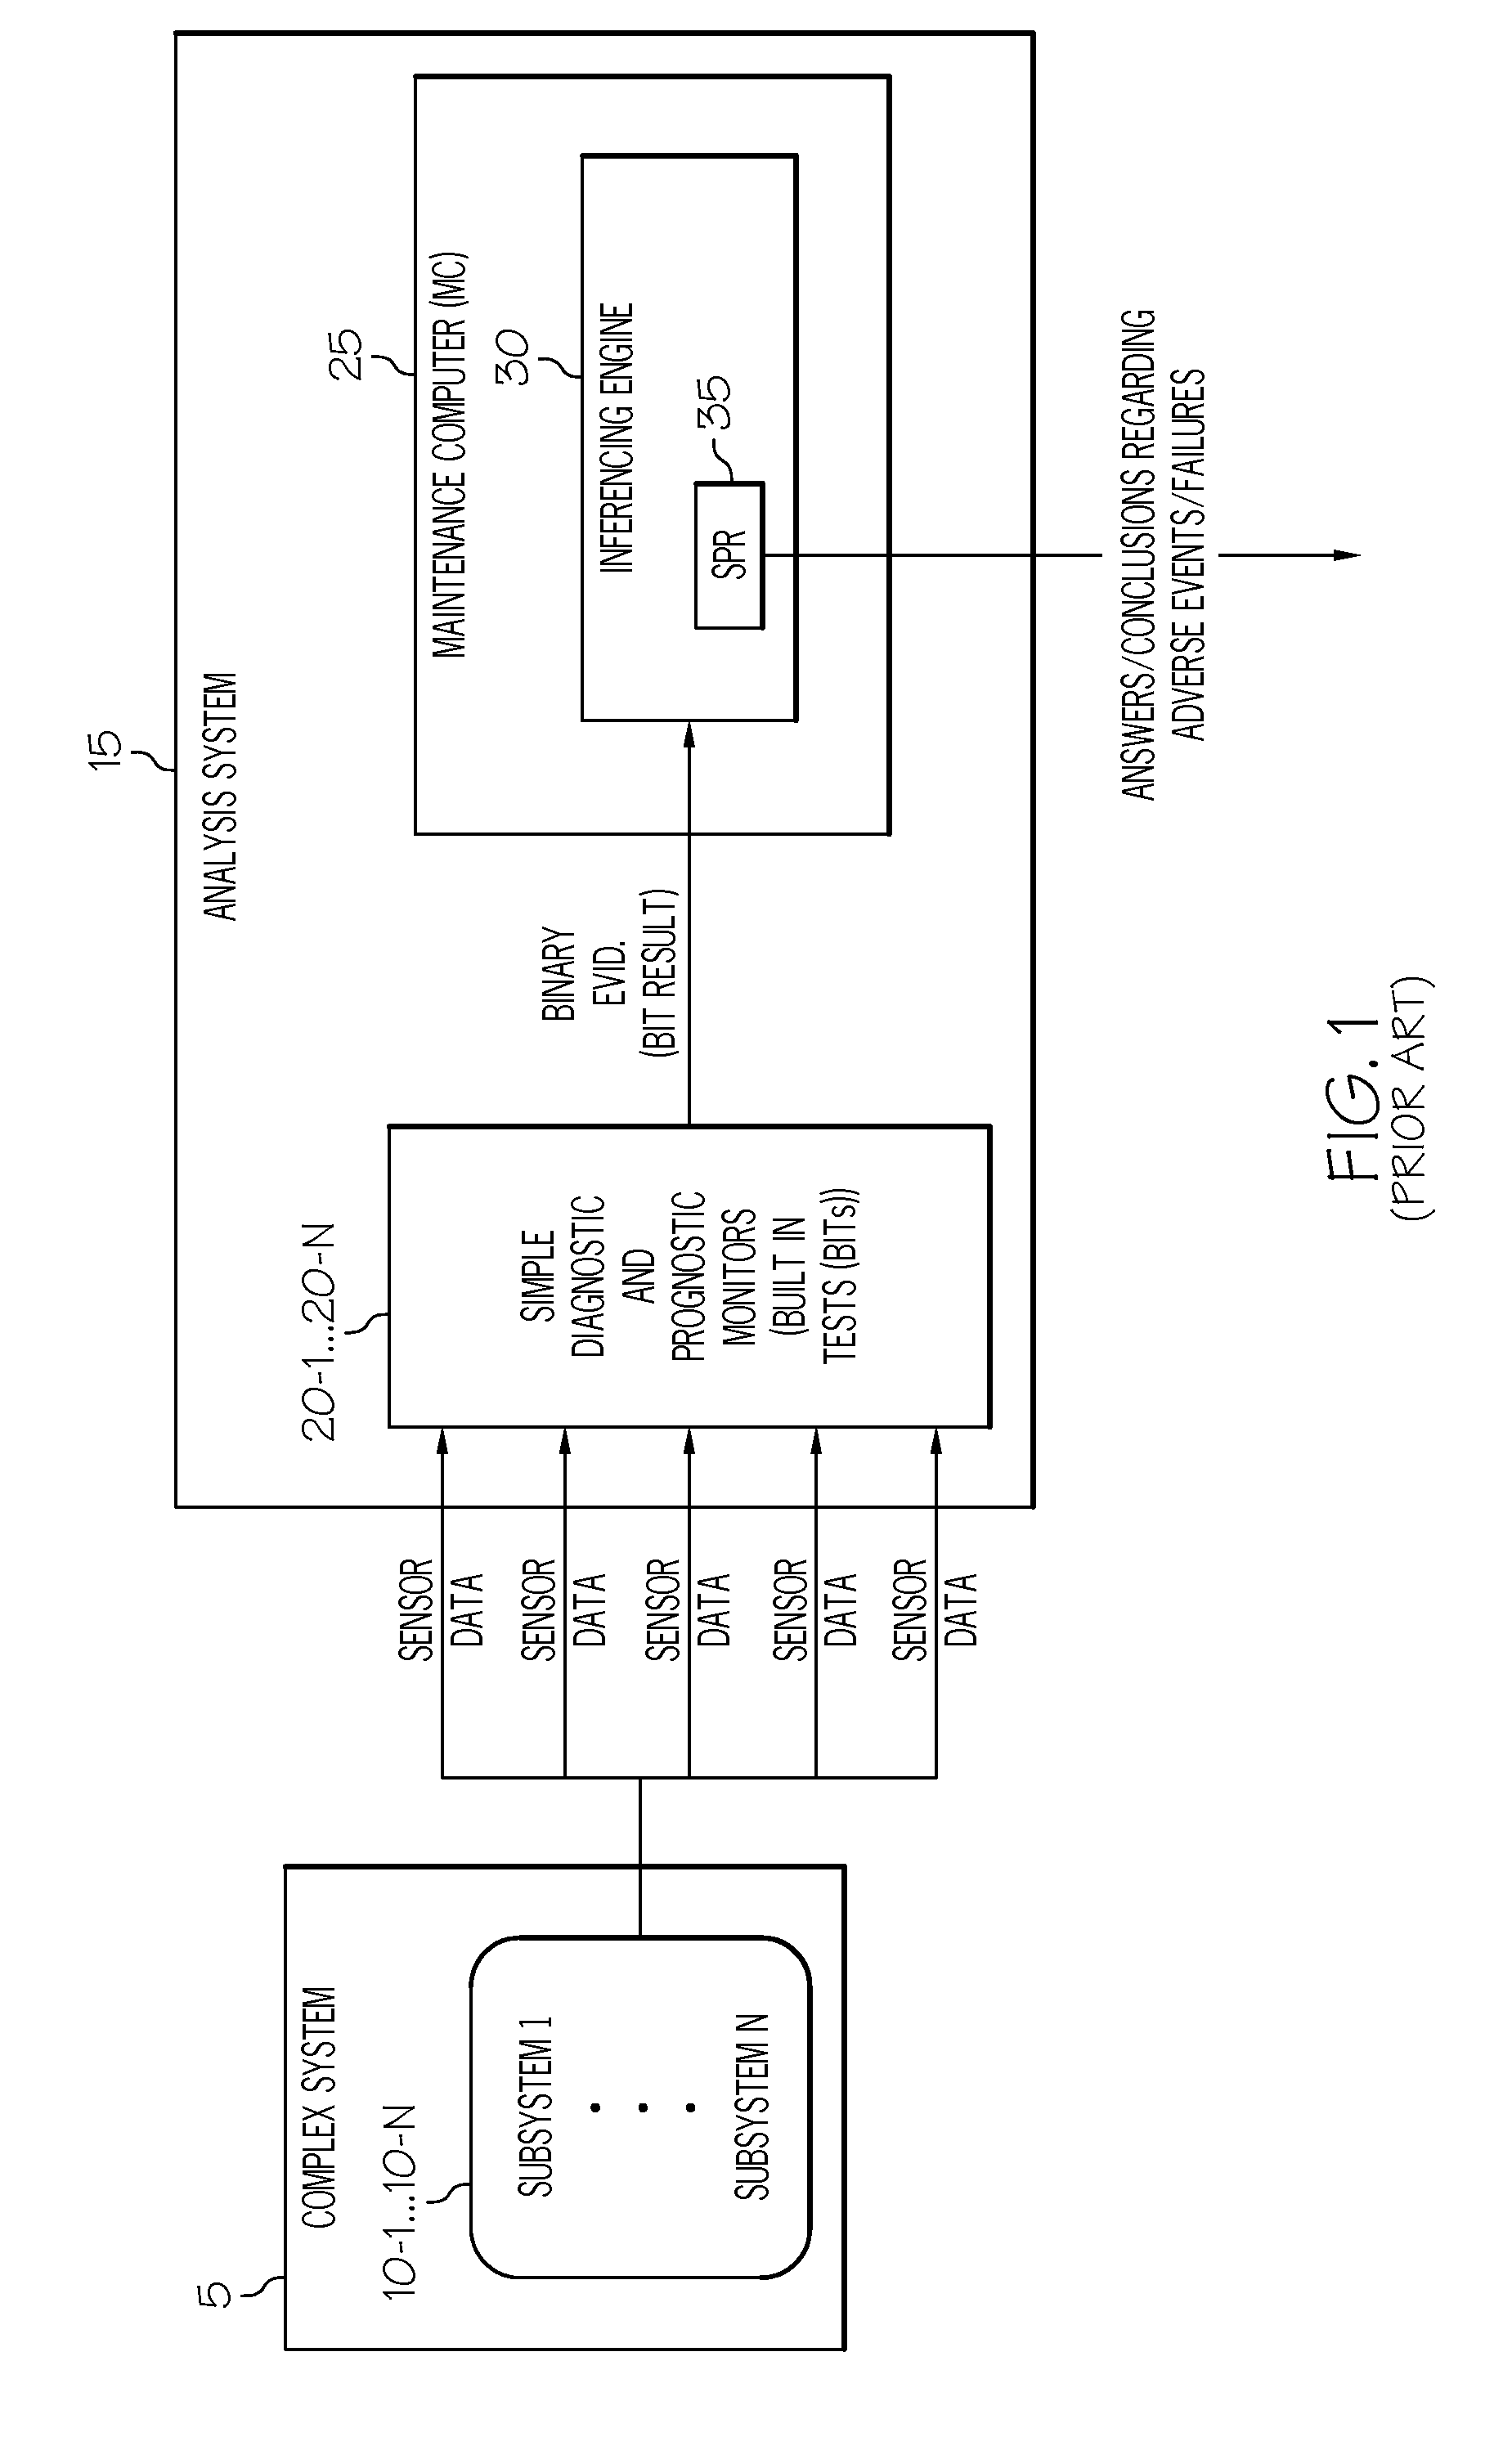 Methods systems and apparatus for analyzing complex systems via prognostic reasoning